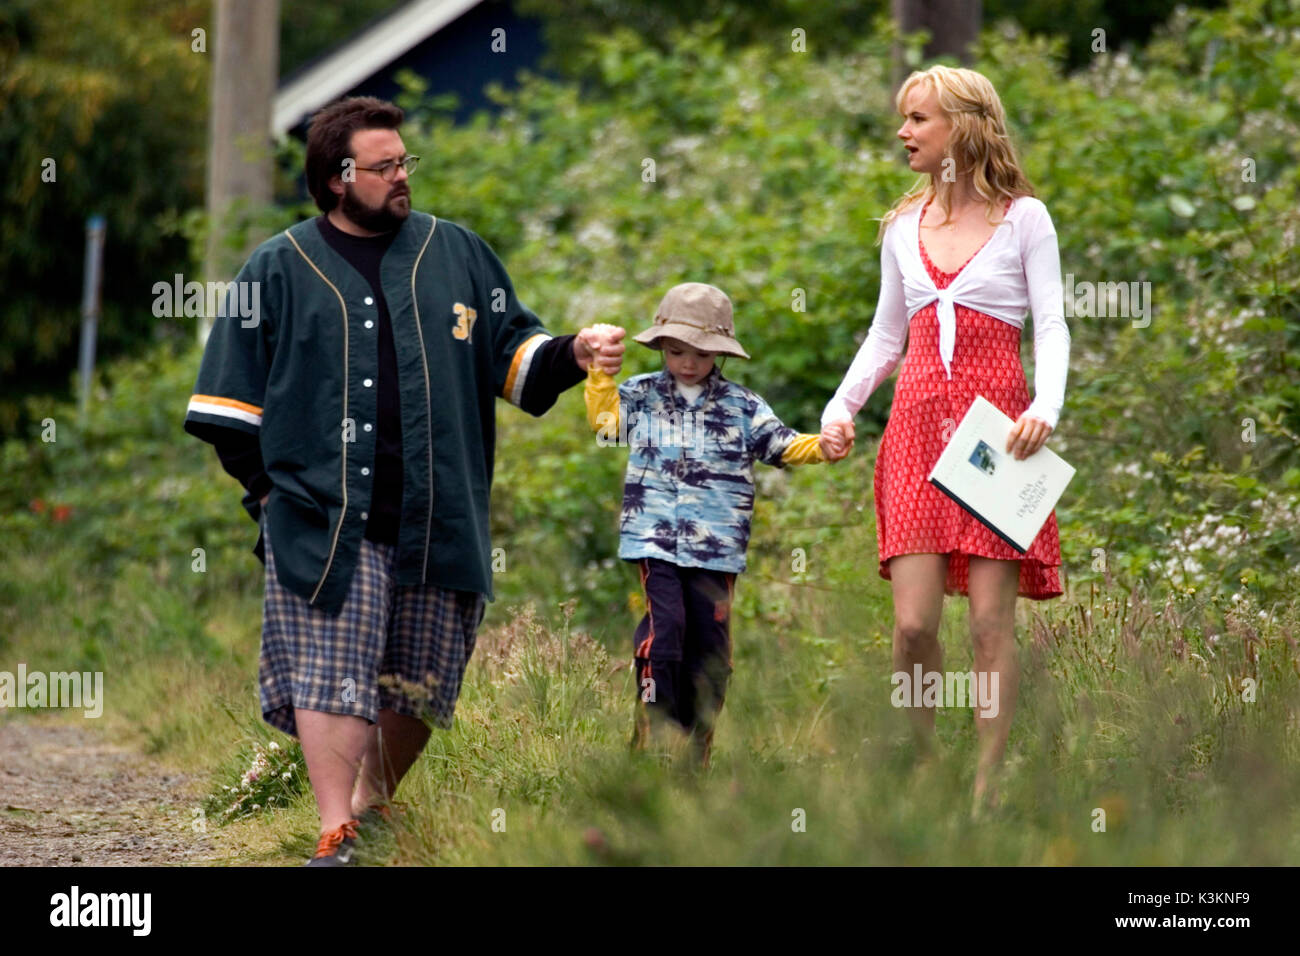 CATCH AND RELEASE KEVIN SMITH, JOSHUA FRIESEN, JULIETTE LEWIS        Date: 2006 Stock Photo